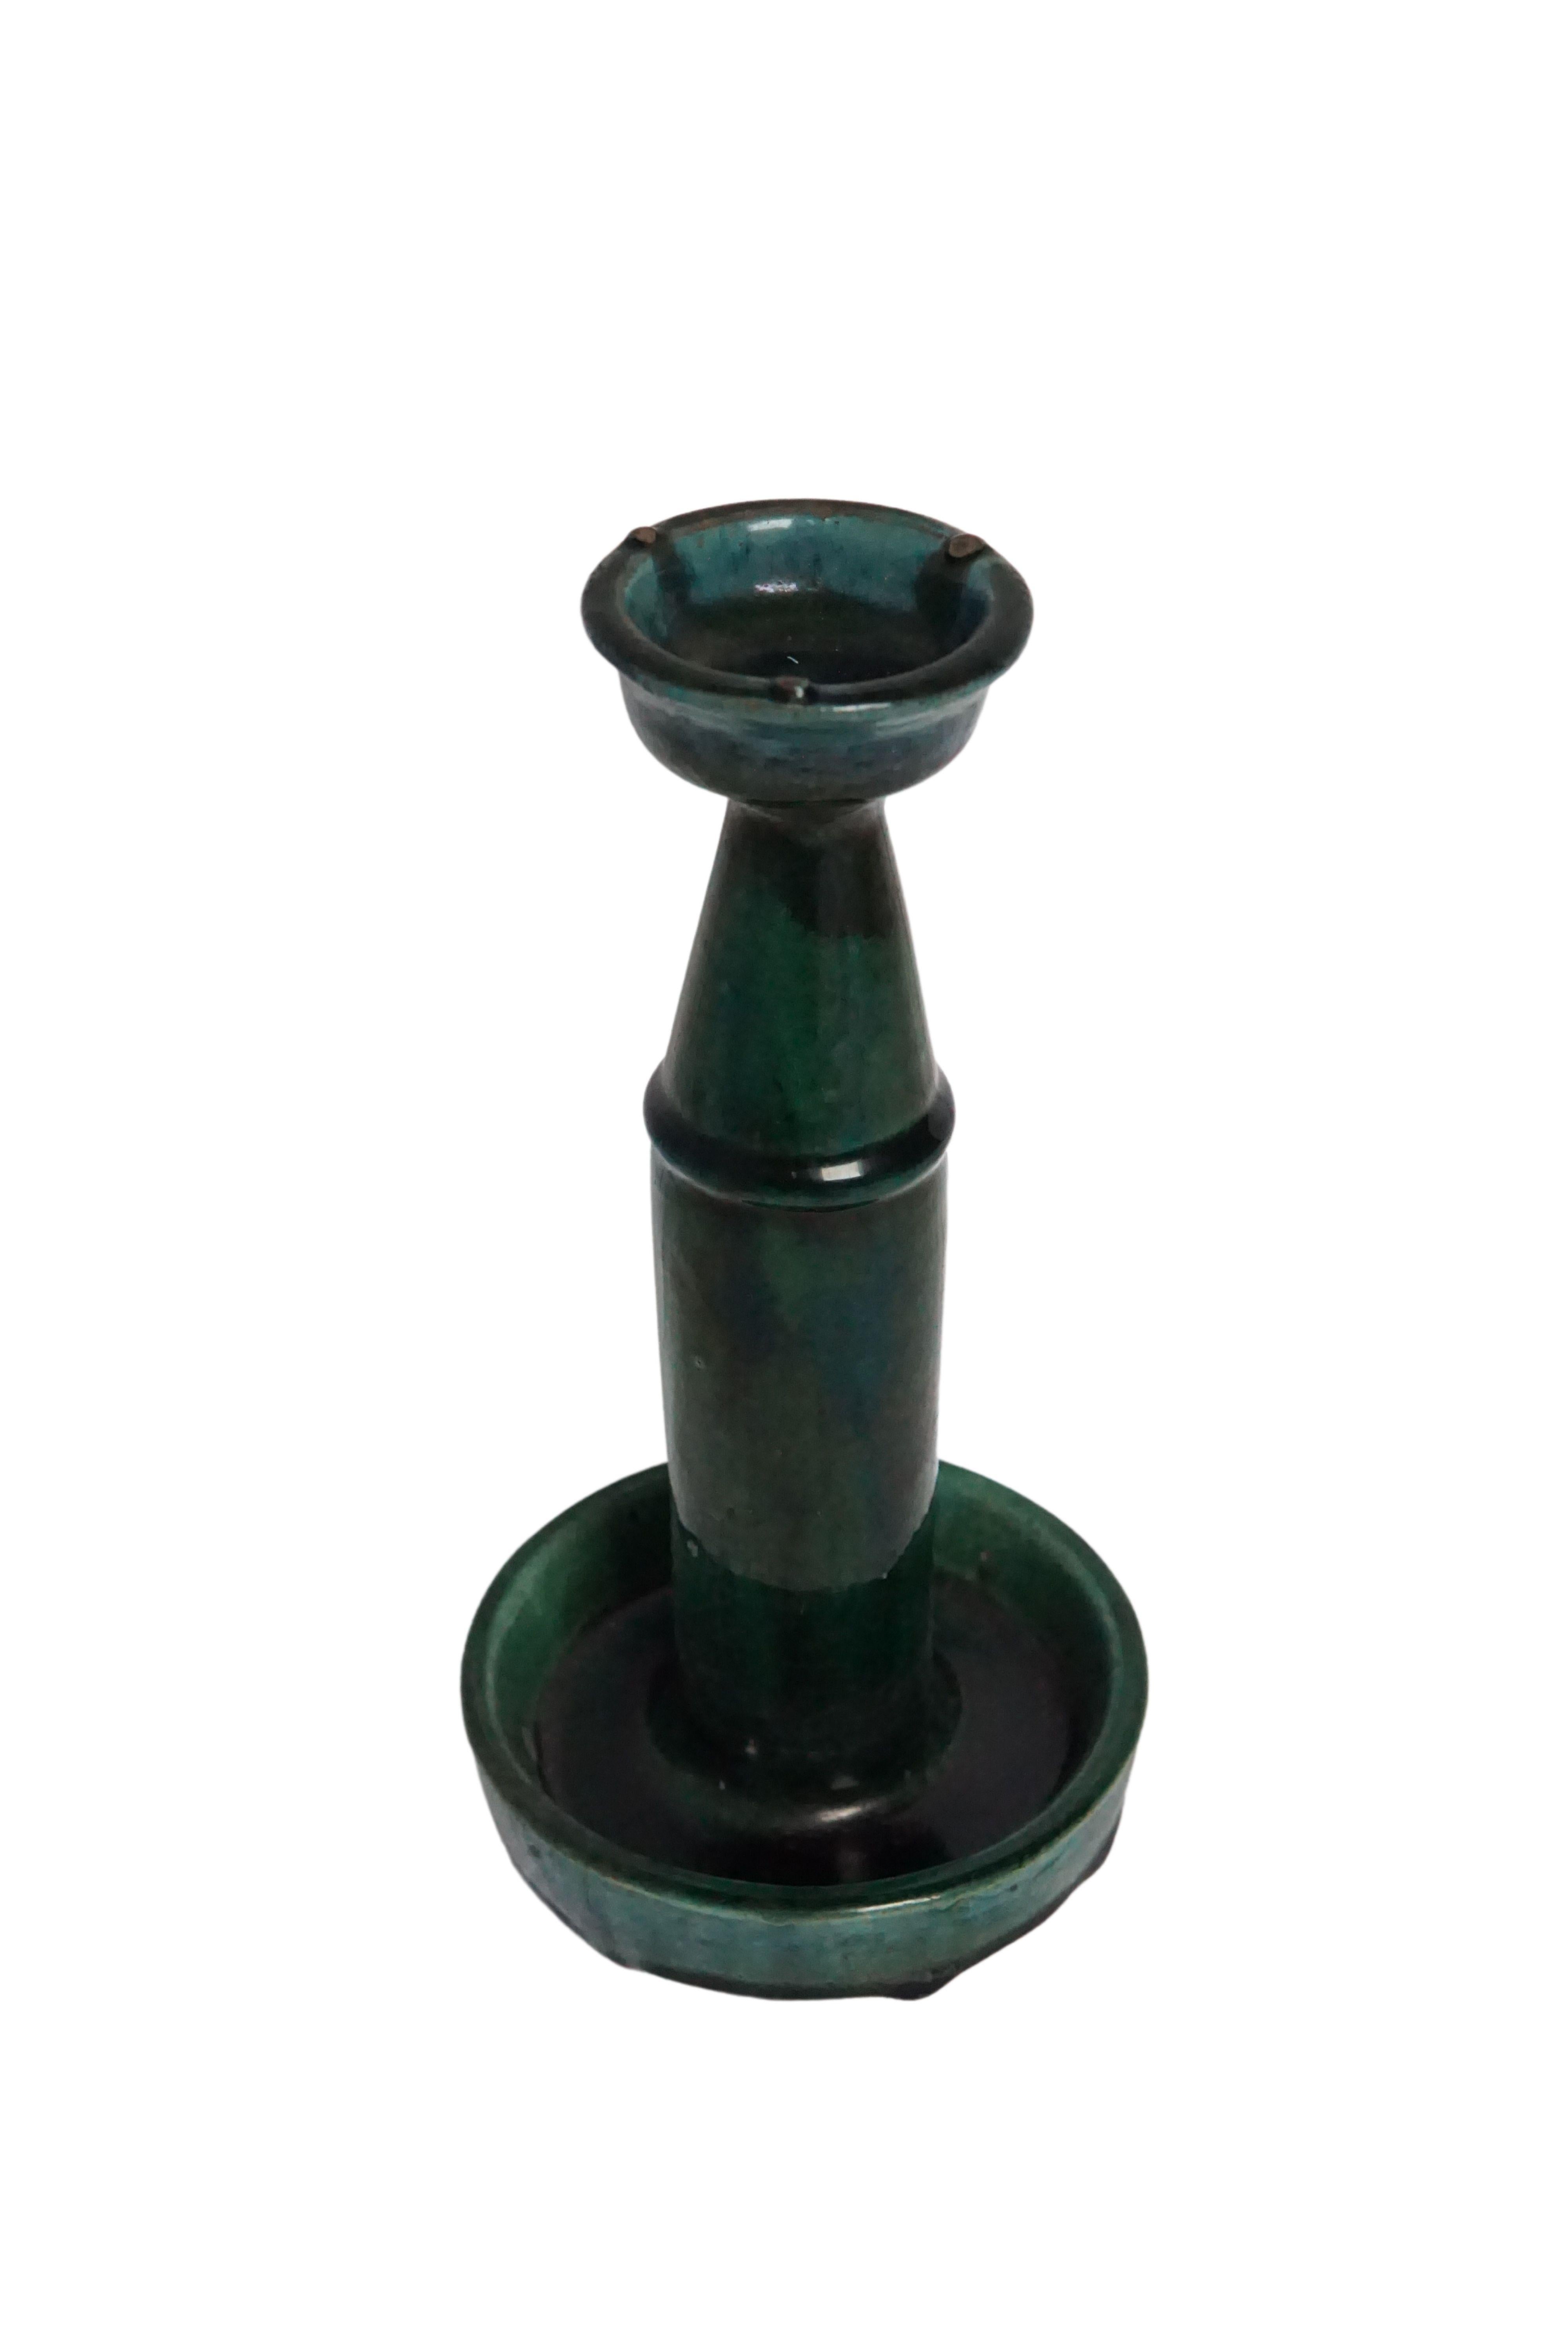 This Shiwan ware oil lamp from the early 20th century features a green glaze. Shiwan ware is a style of Chinese pottery from the Shiwanzhen district near Guangdong, China. A elegant decorative object or candleholder. 

Measures: Diameter 13 cm